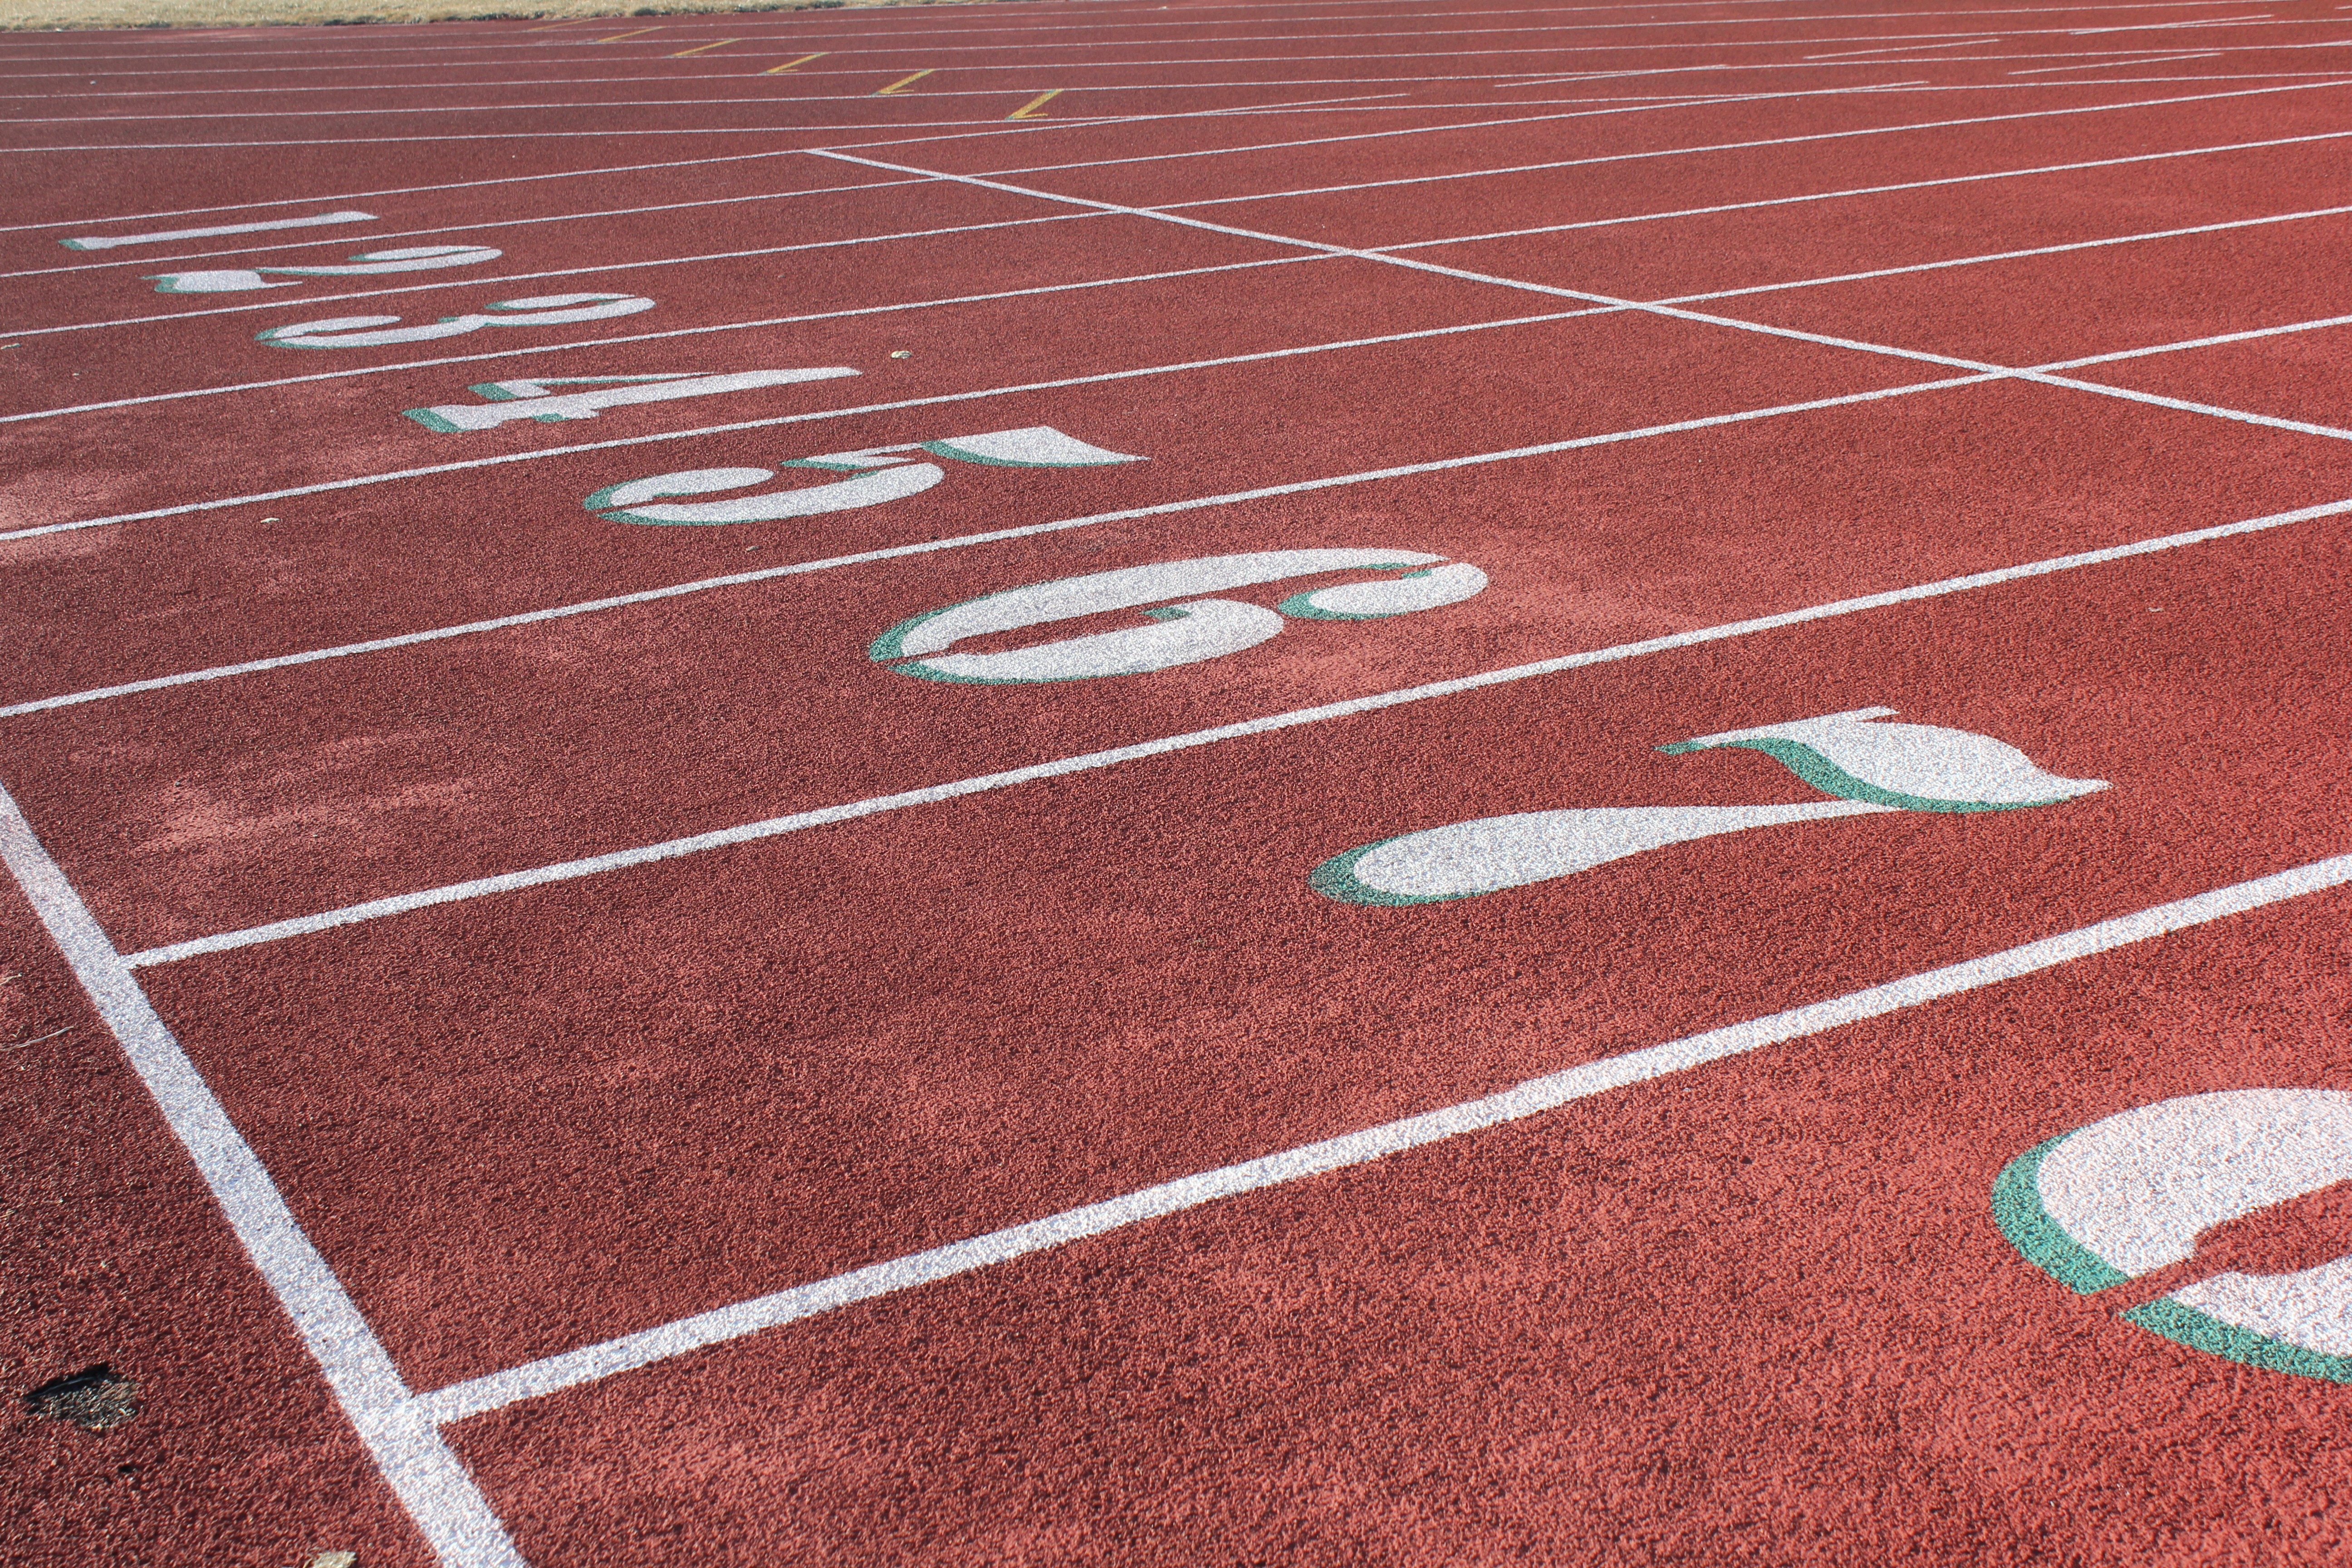 track and field wallpaper,race track,track and field athletics,sport venue,athletics,lane